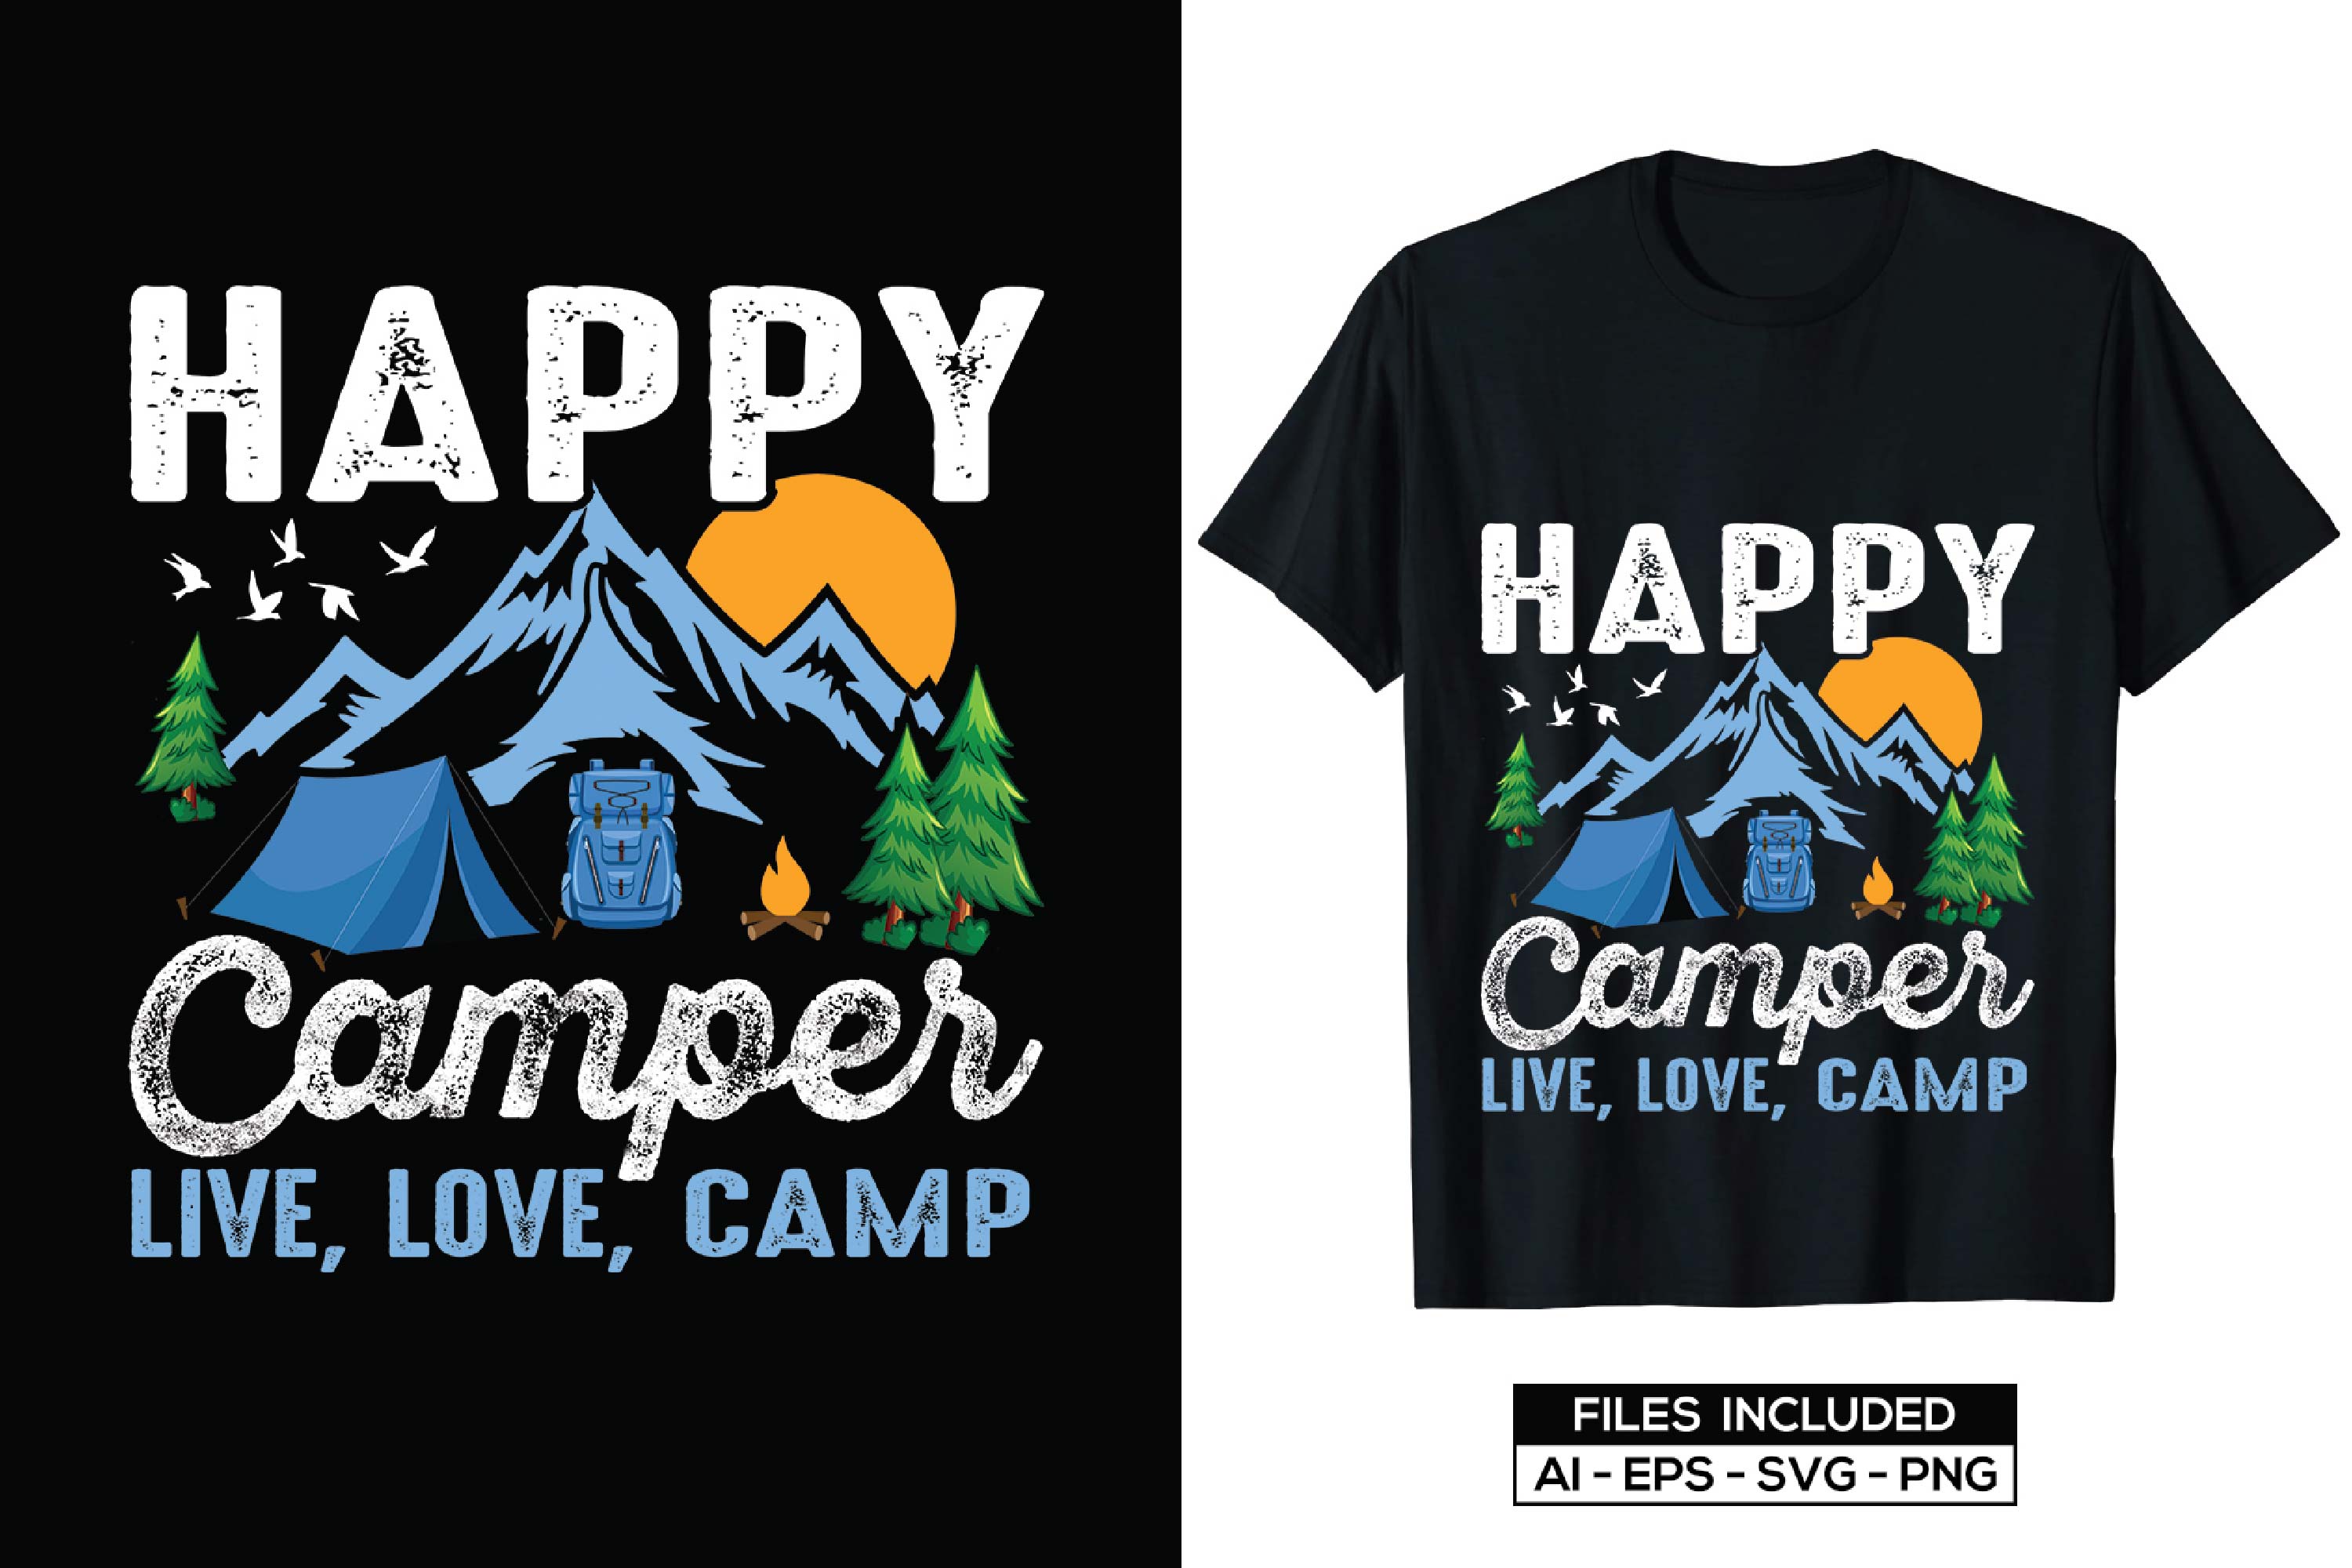 Image of a black t-shirt with a great camping themed print.